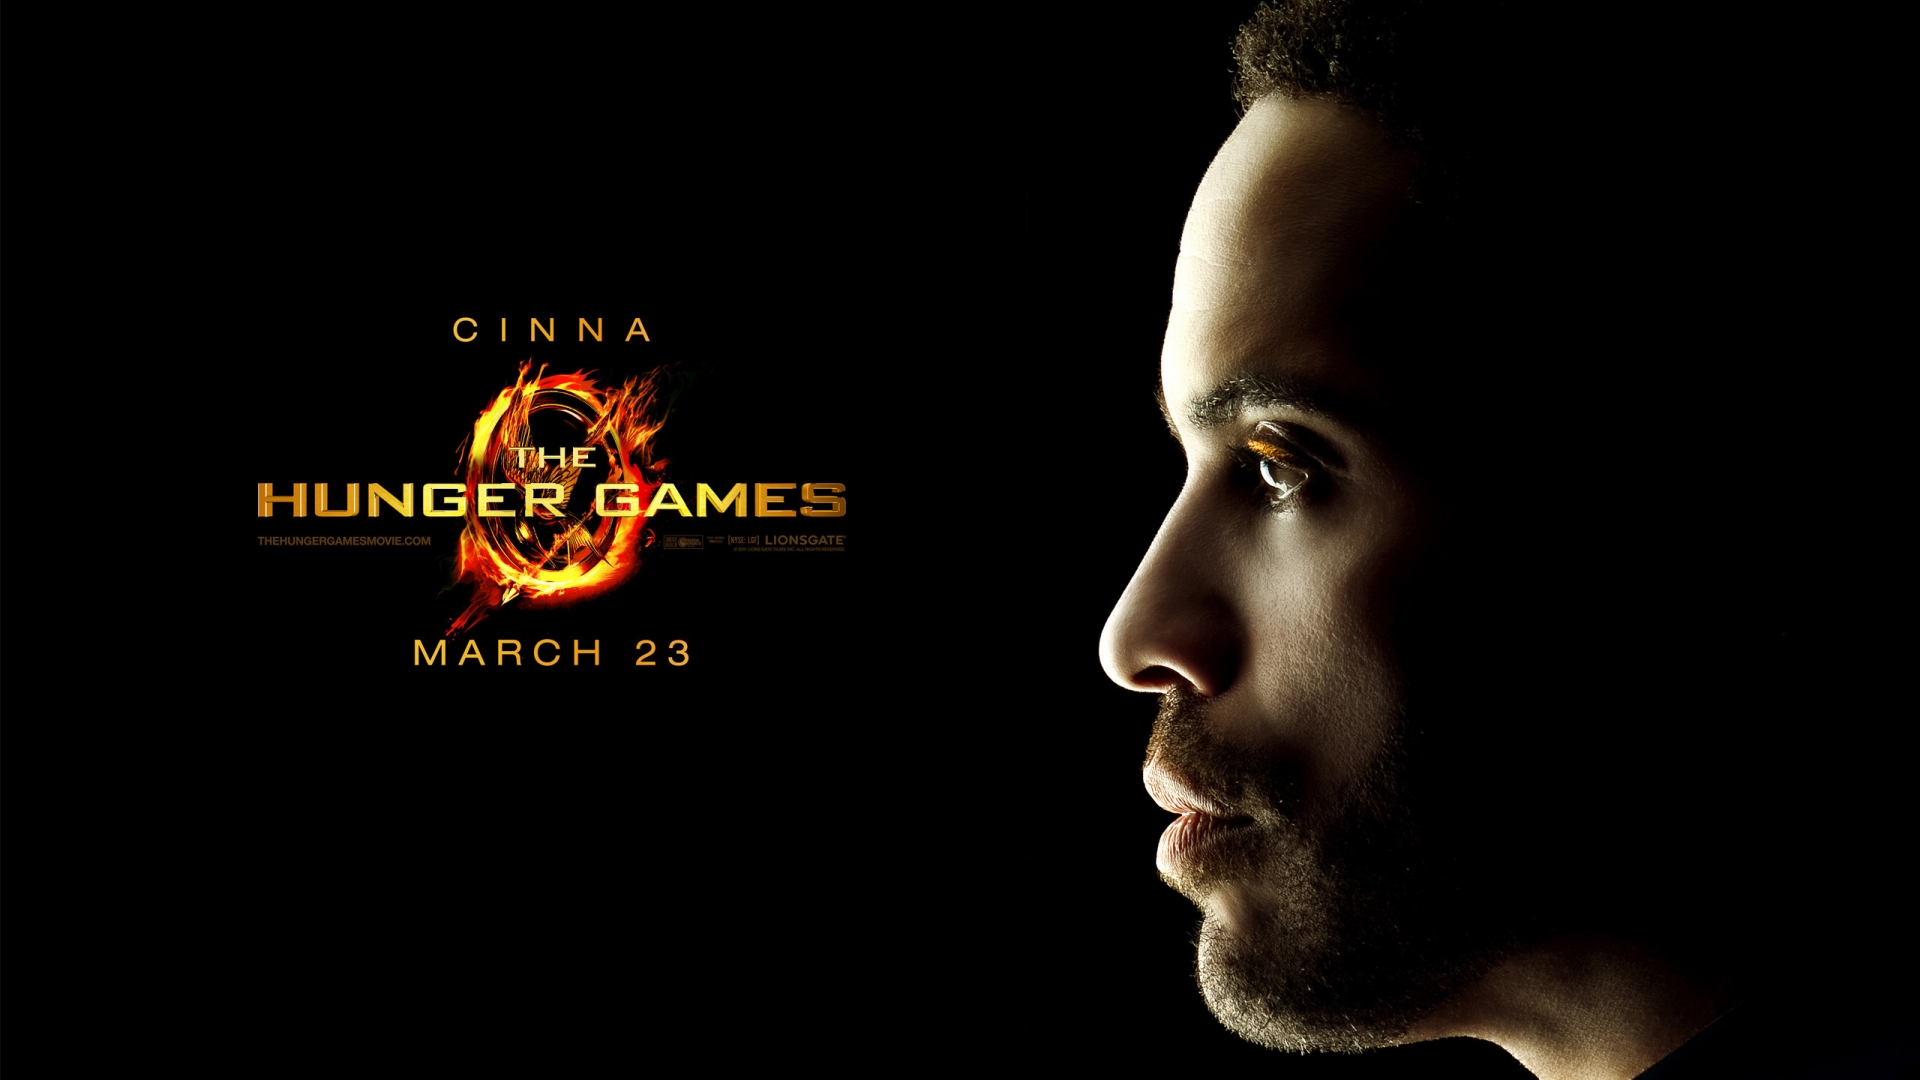 The Hunger Games Cinna for 1920 x 1080 HDTV 1080p resolution